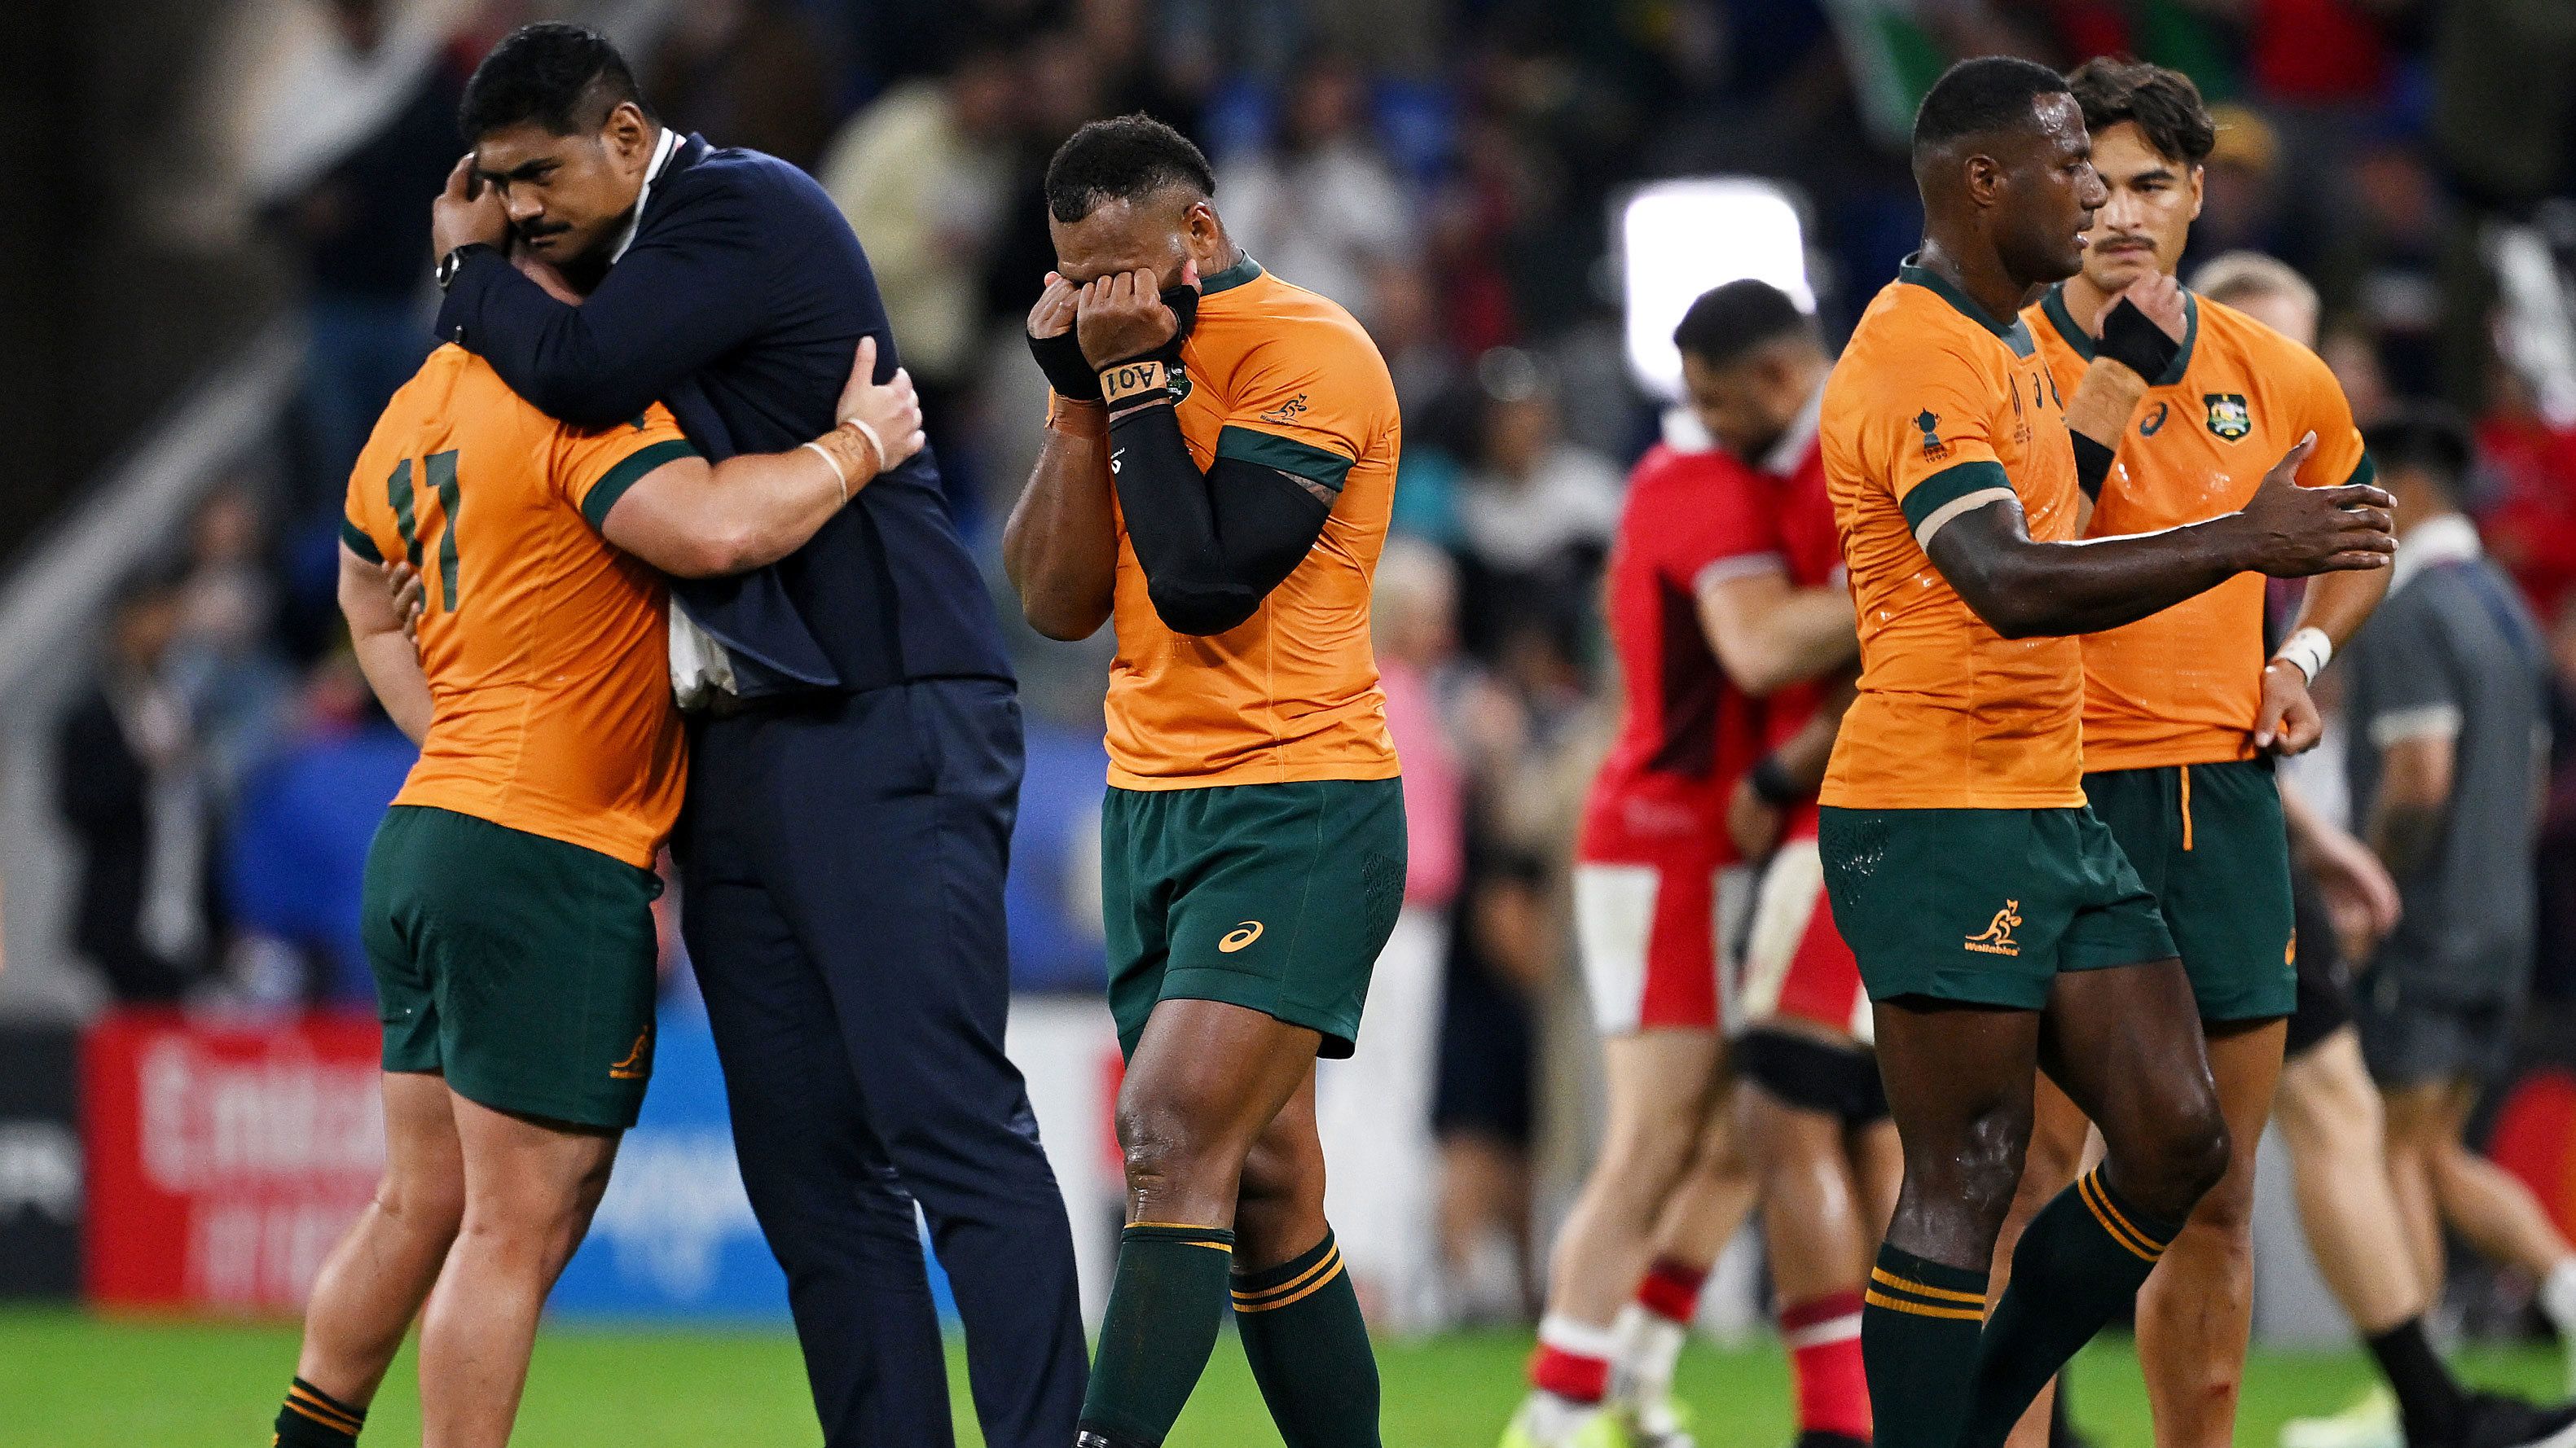 Injured Wallabies captain Will Skelton consoles Blake Schoupp as Samu Kerevi looks dejected at full-time following the Rugby World Cup match against Wales. 